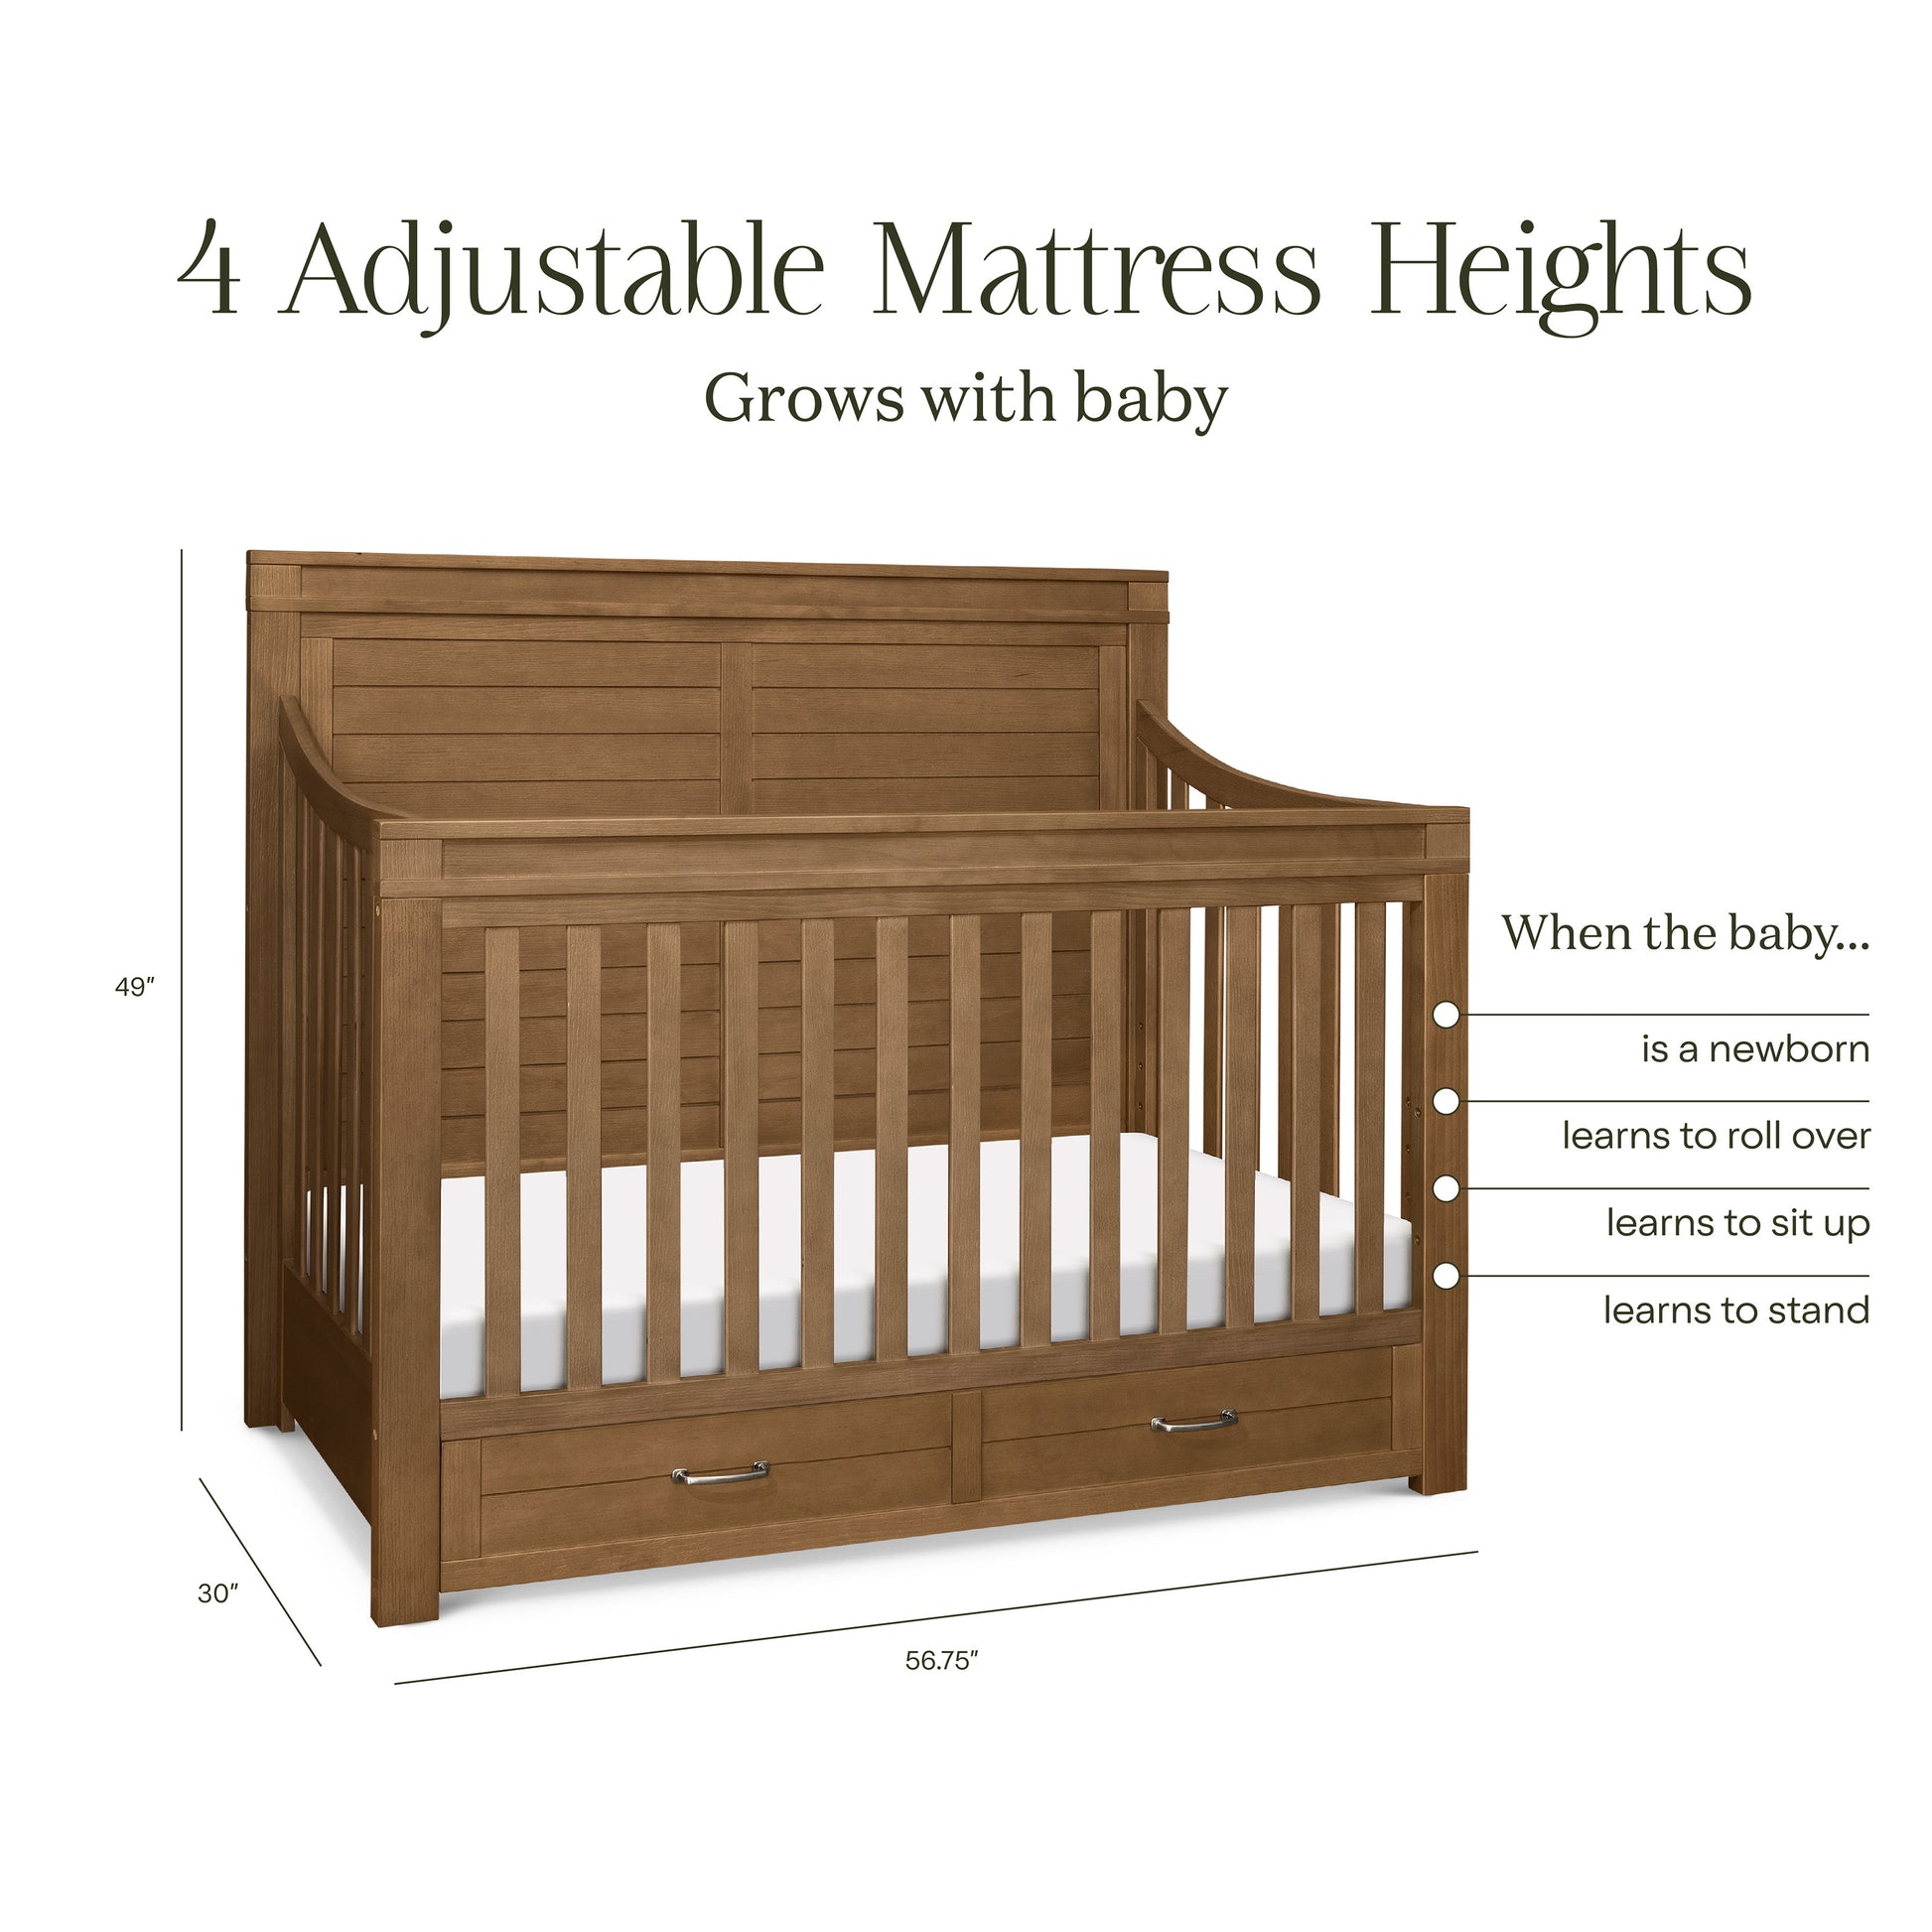 M21101SW,Wesley Farmhouse 4-in-1 Convertible Crib in Stablewood